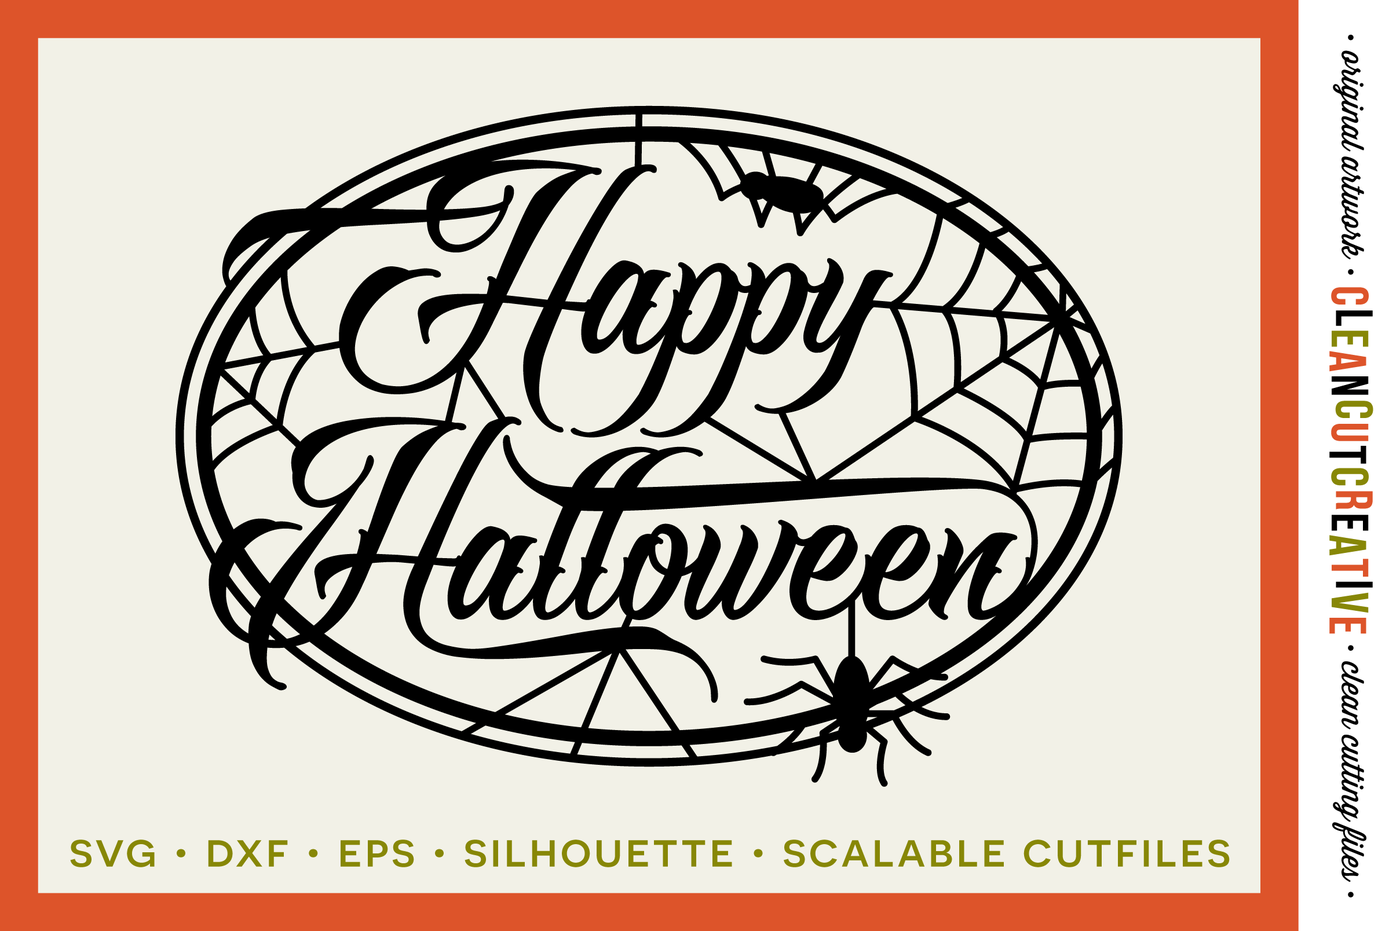 ori 34620 f5eafb43875c37a470b3e96b9bc022eddf7f3849 svg happy halloween svg trick or treat svg halloween svg spider cob web svg svg dxf eps png cricut and silhouette clean cutting files